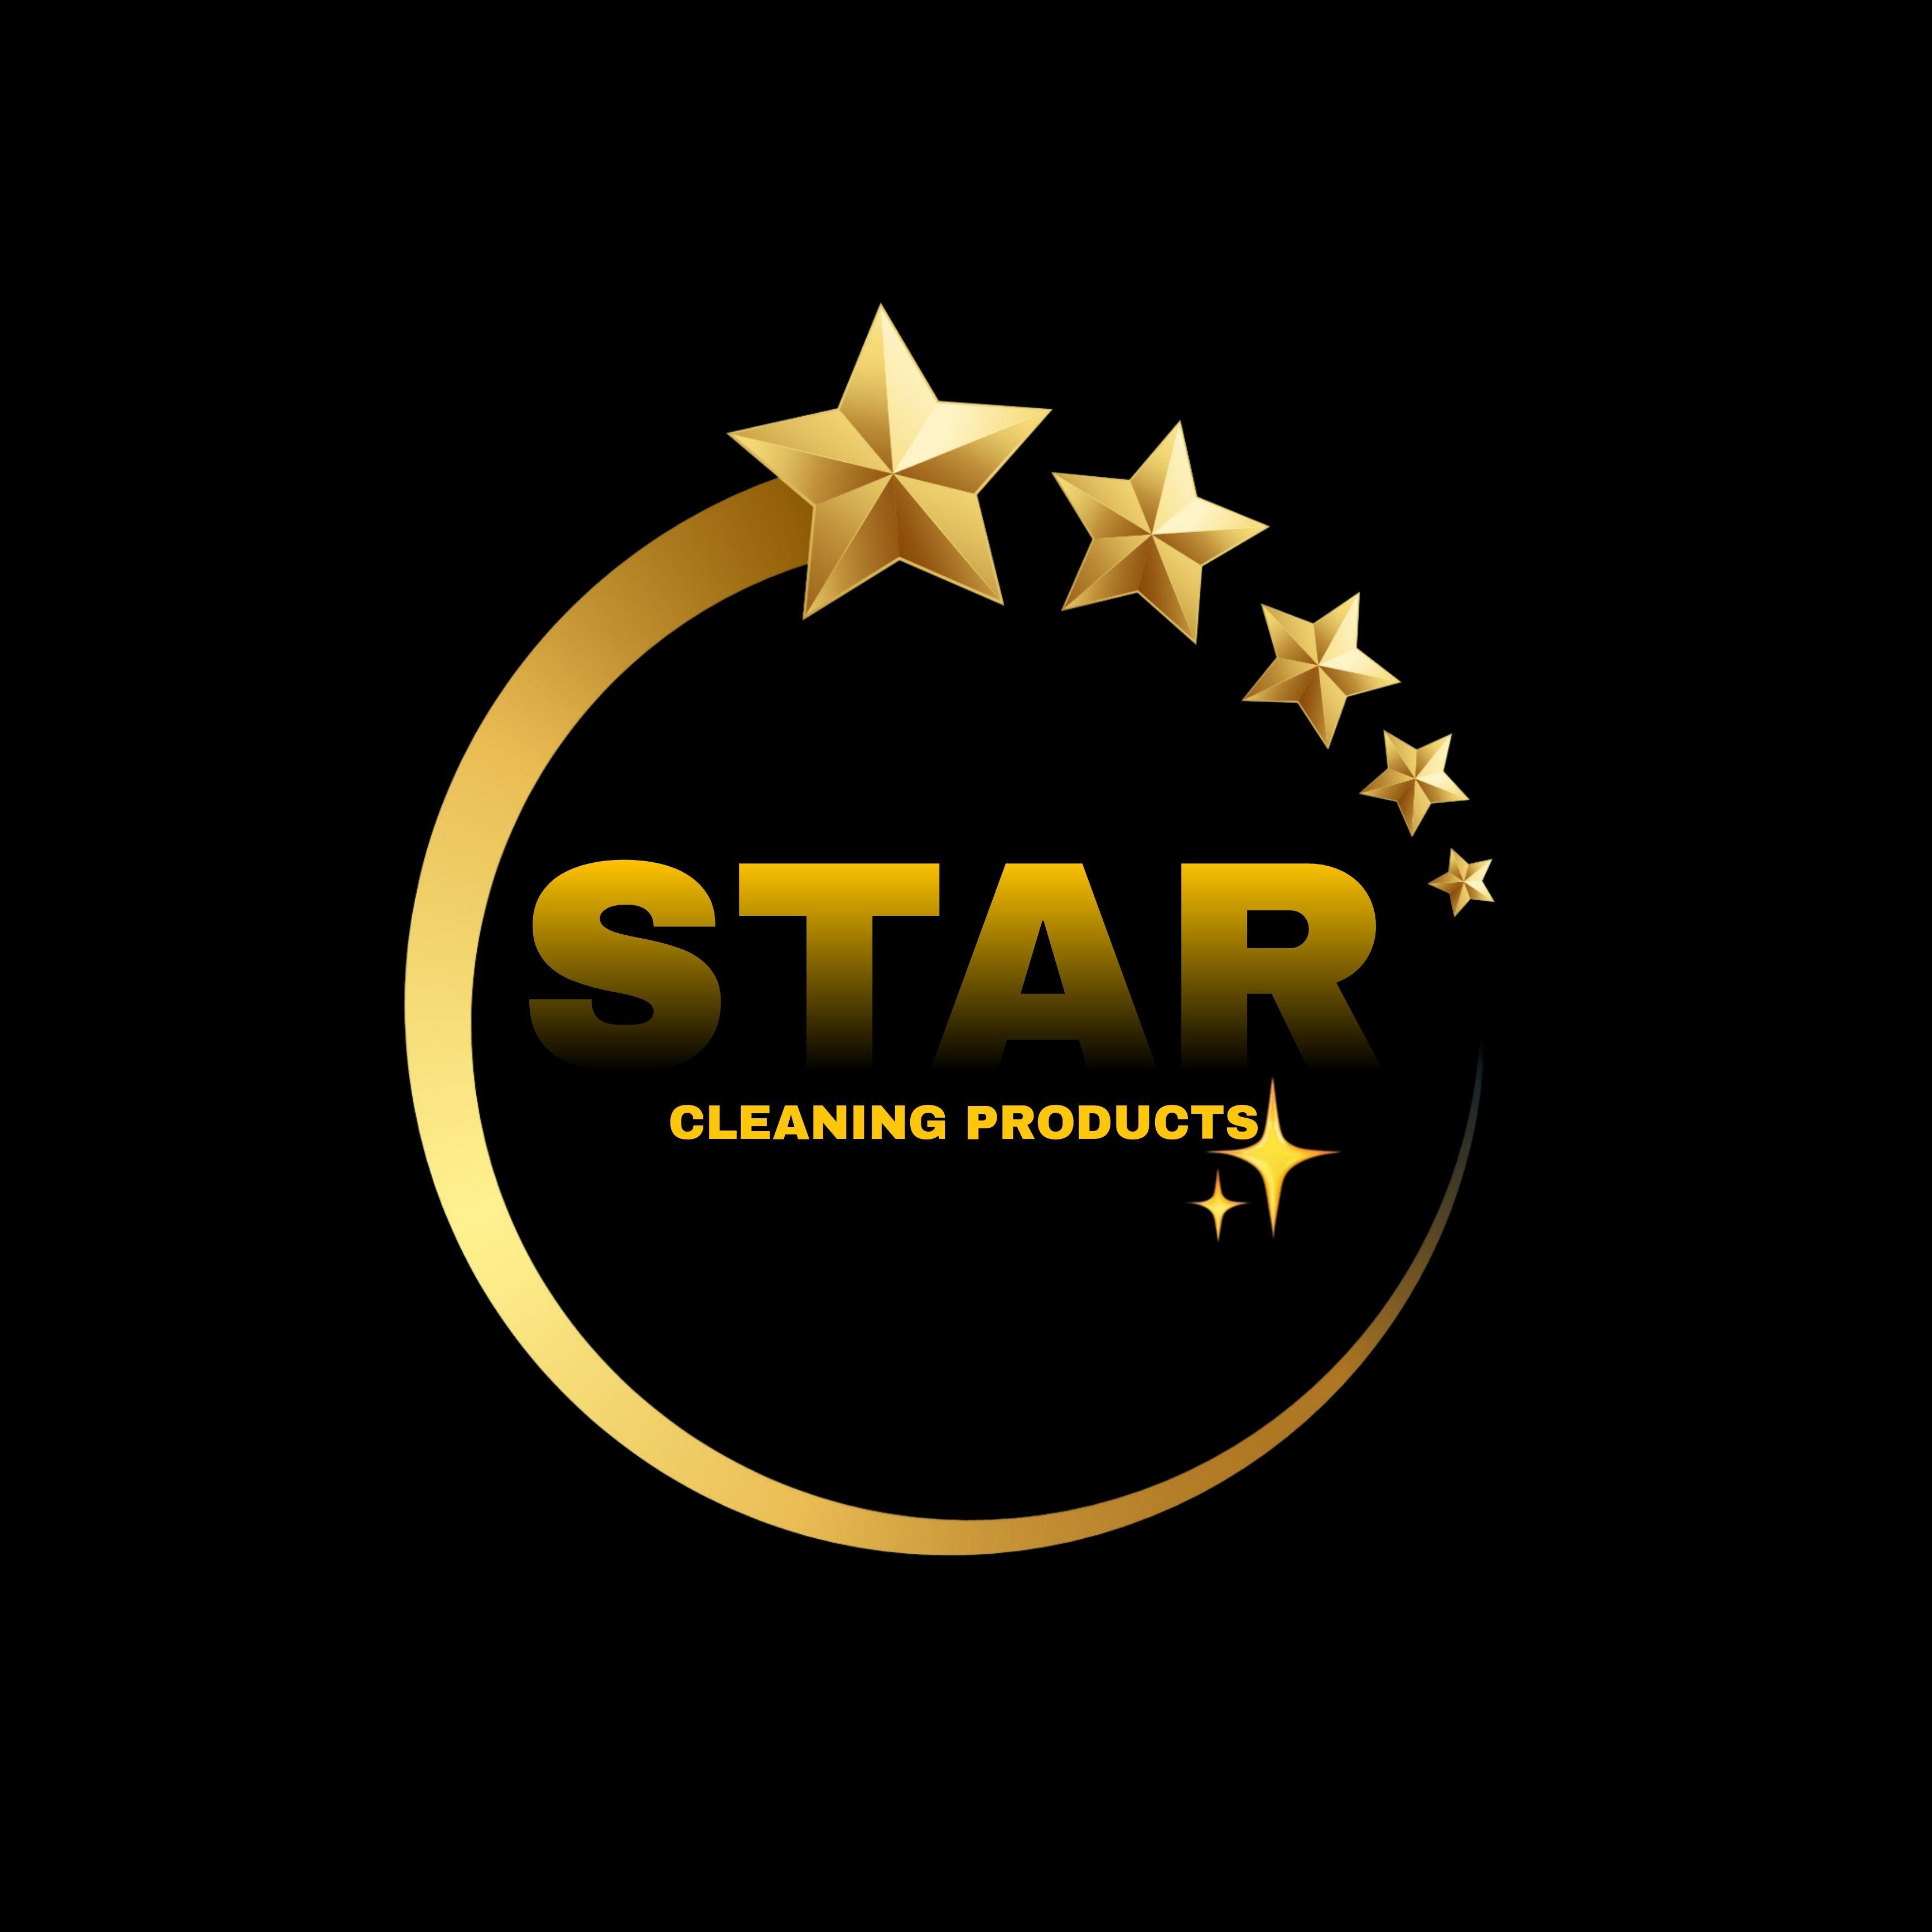 Star Cleaning Products